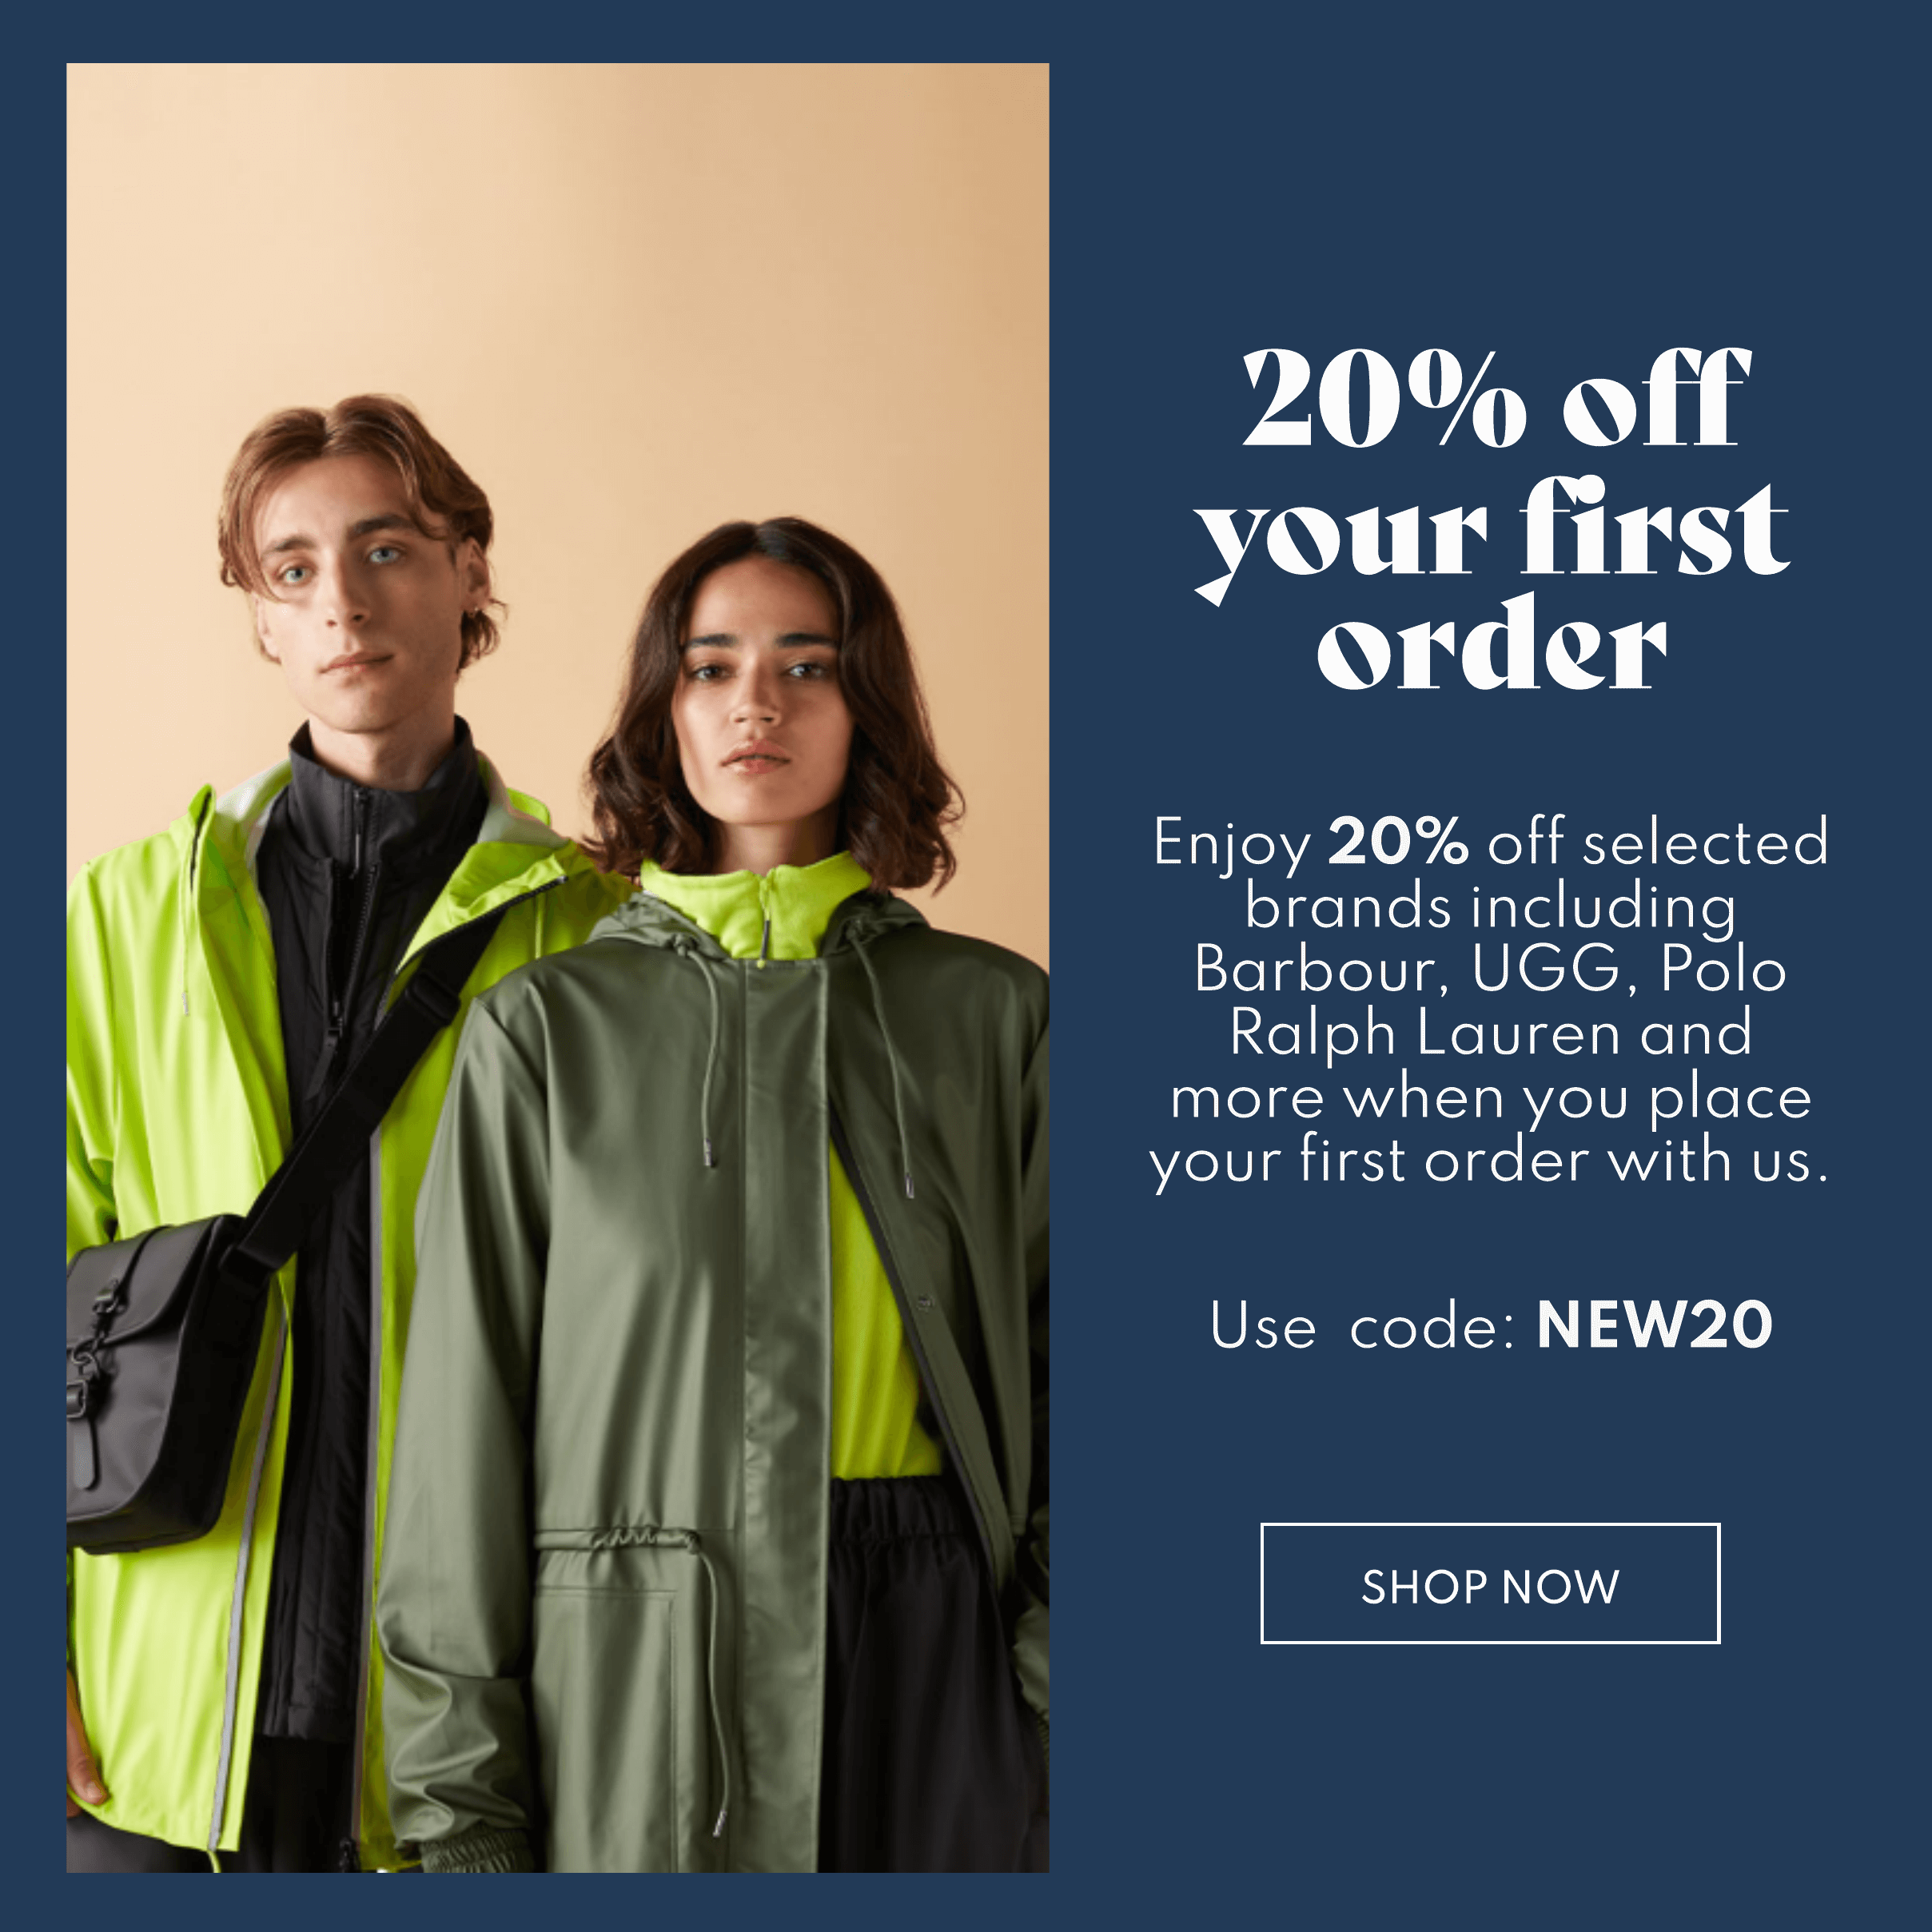 Save 20% off your first order! - The Hut UK